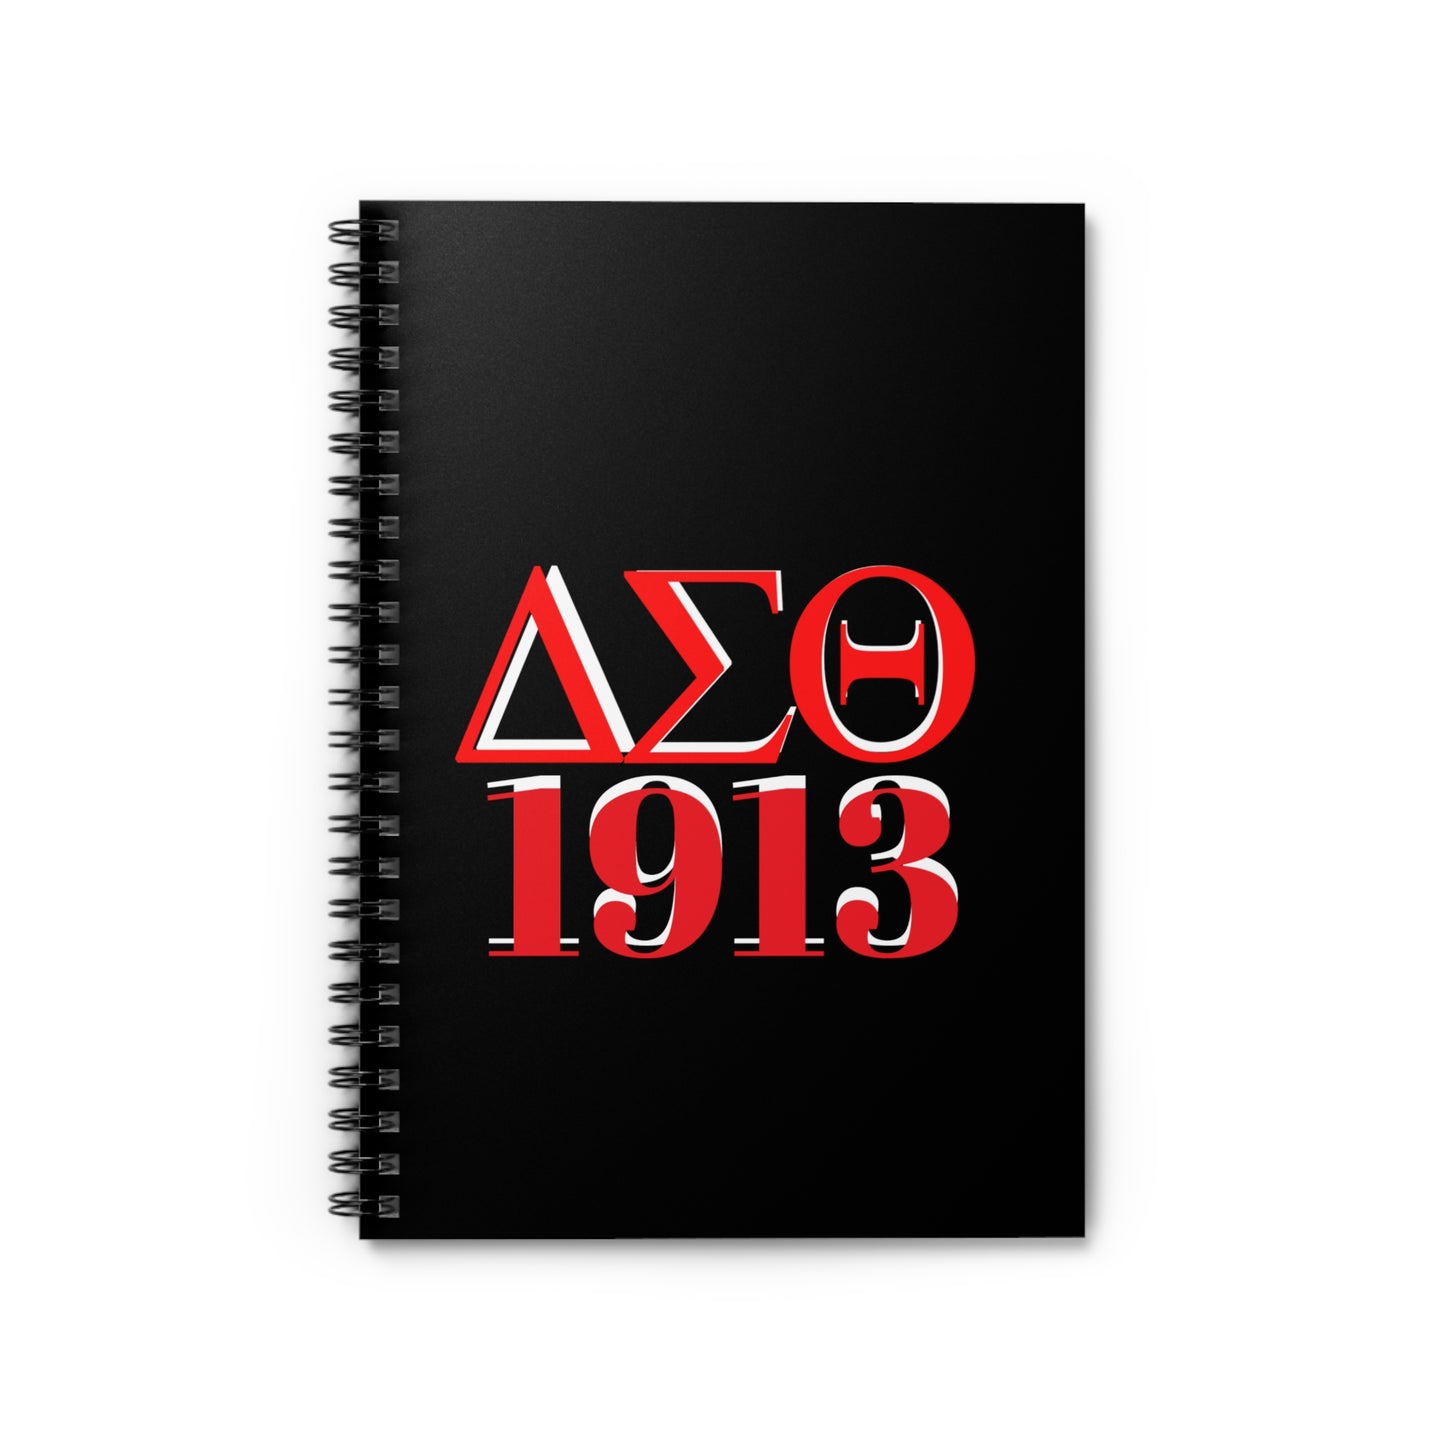 Red and White 1913 DST Spiral Notebook- Ruled Line